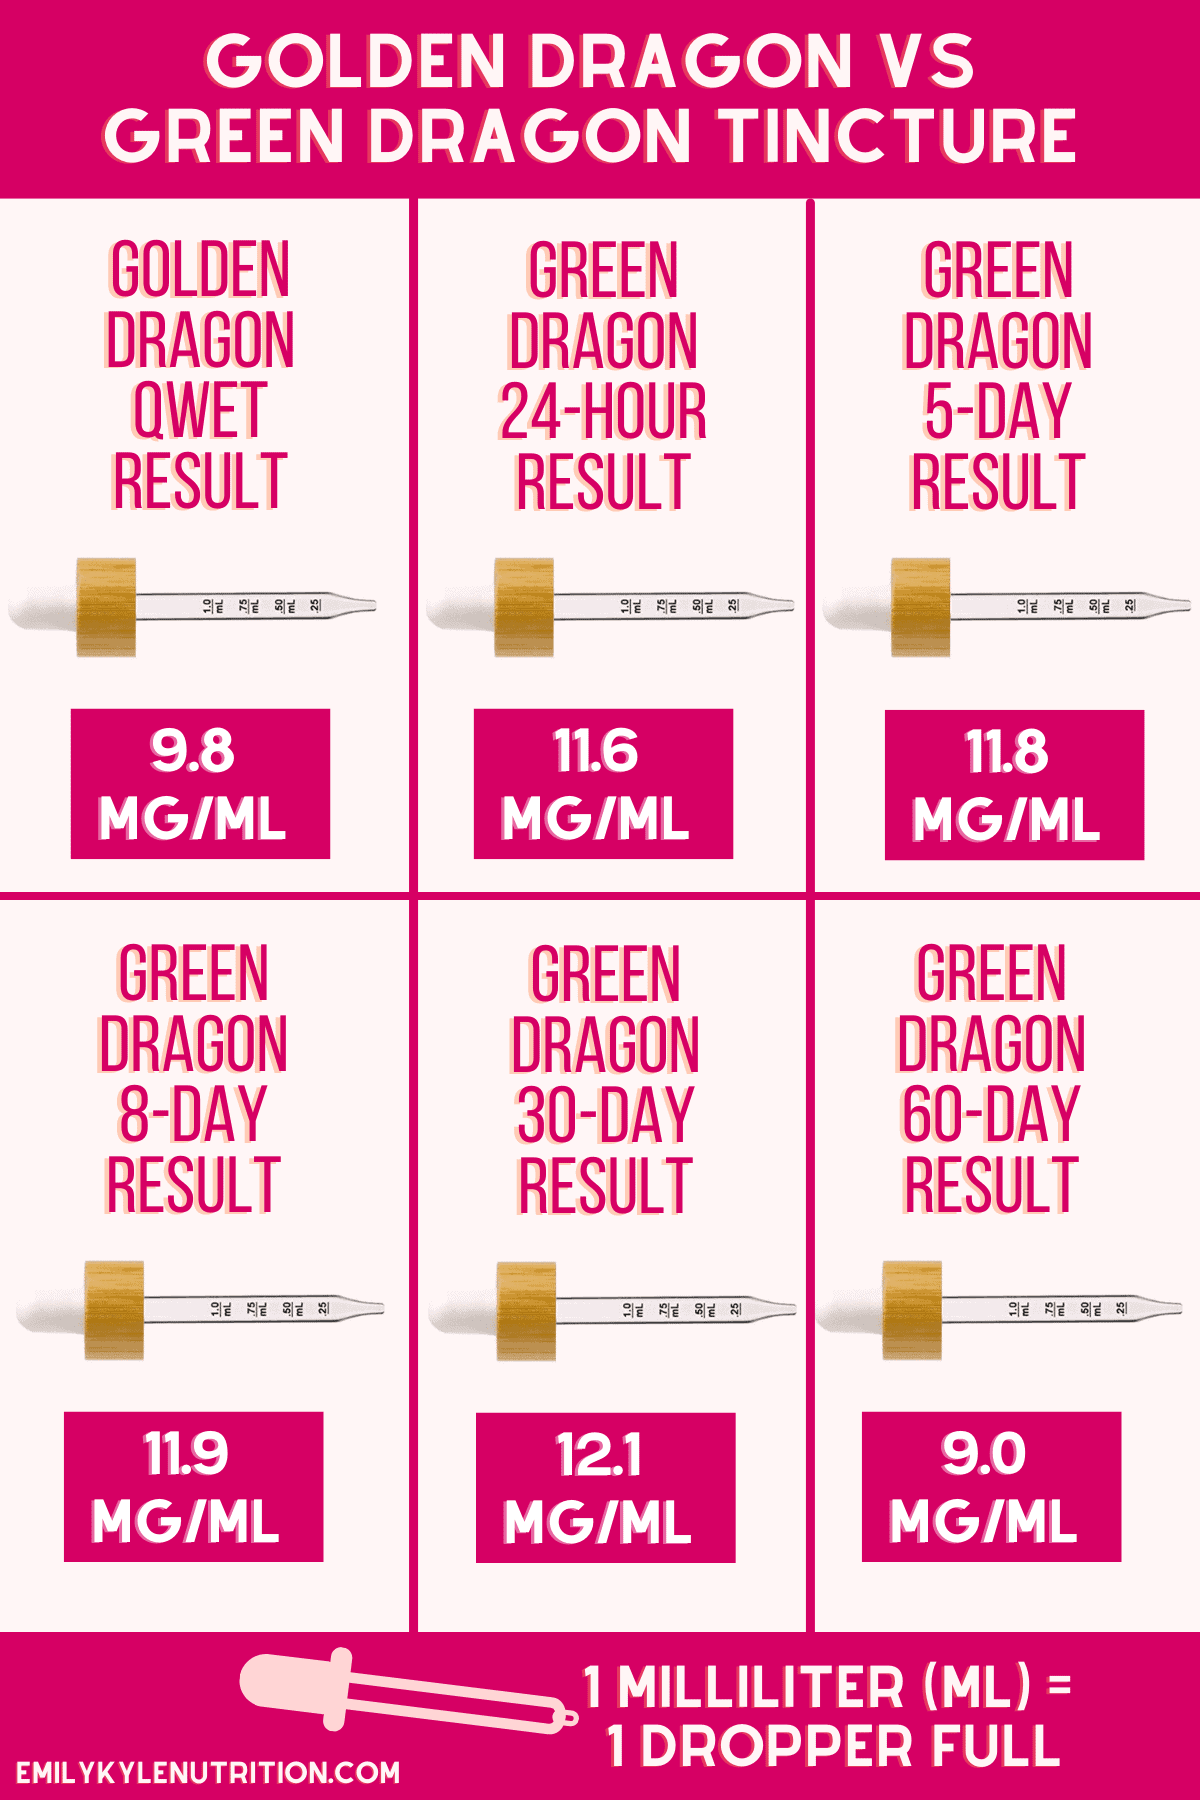 Image showing the Green Dragon vs. Golden Dragon test results.